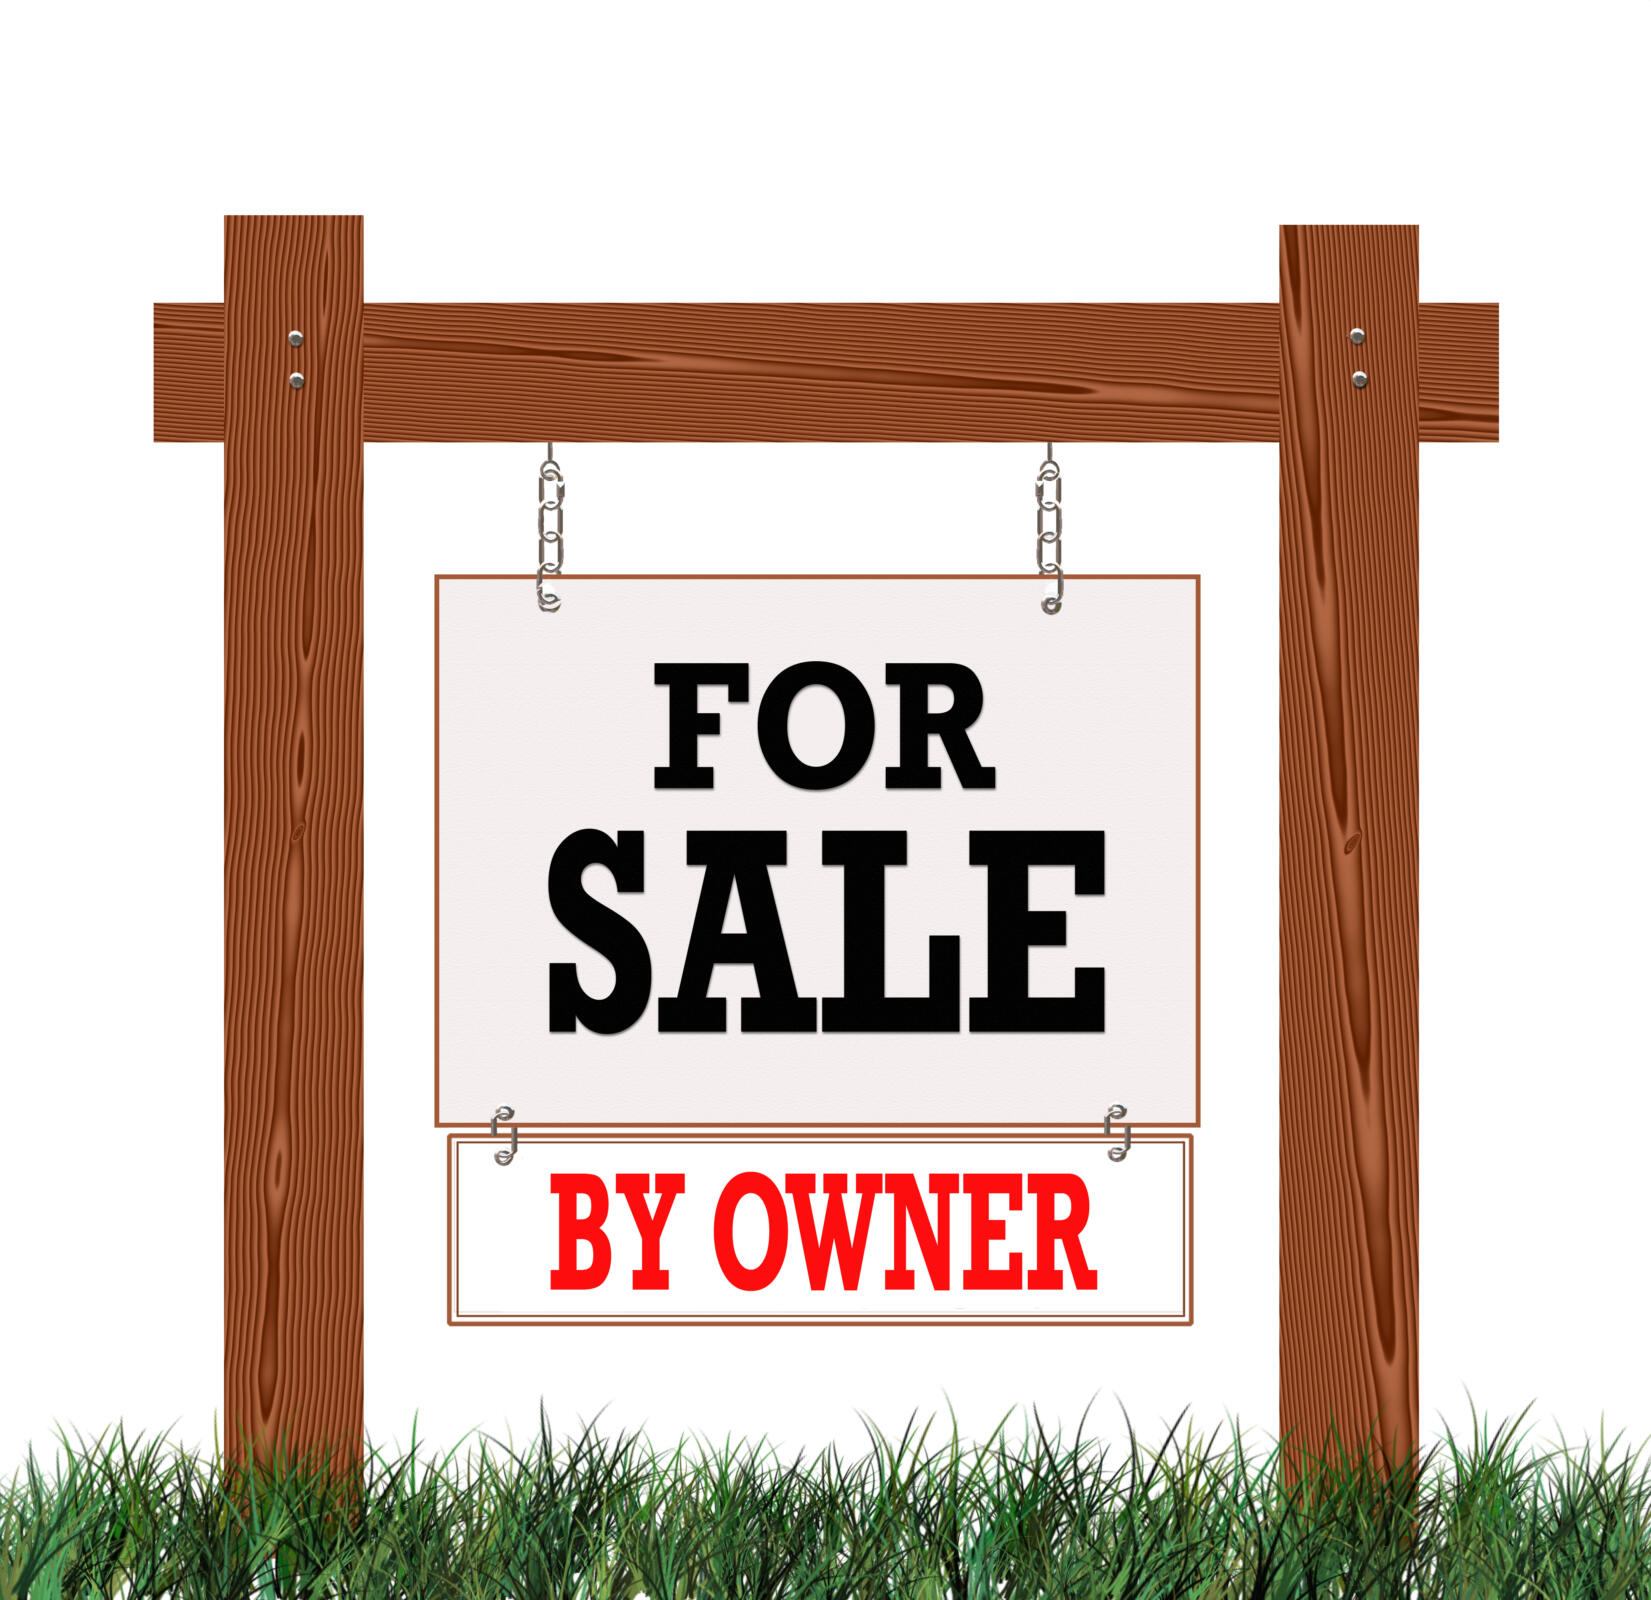 For sale by owner sign vector, selling your home.